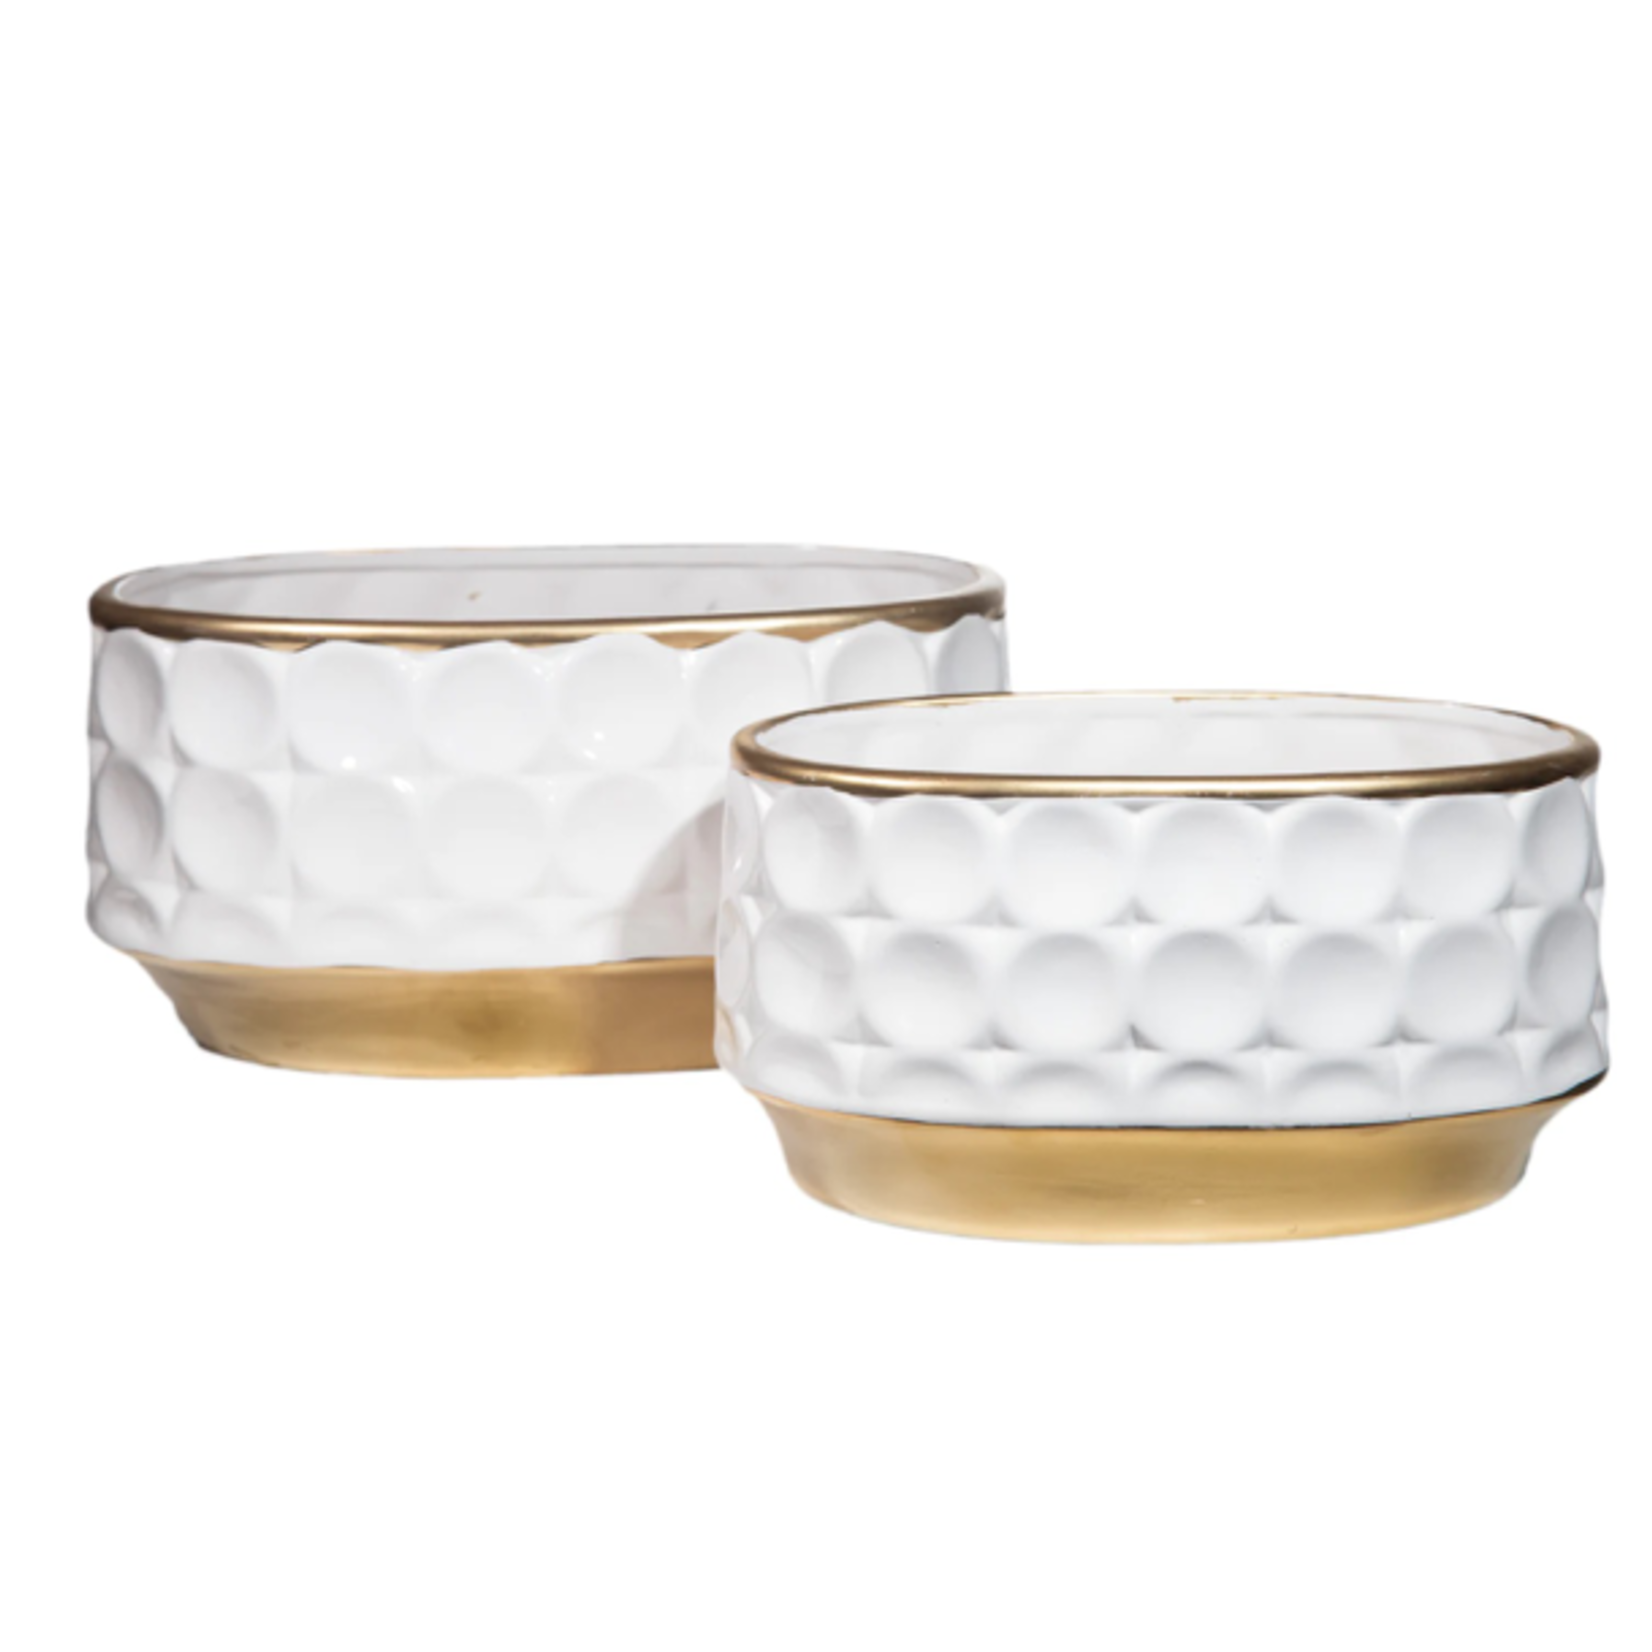 5.5”H X 11”L X 6.5” SMALL MATTE WHITE CERAMIC WITH GOLD OVAL POT DOTTED